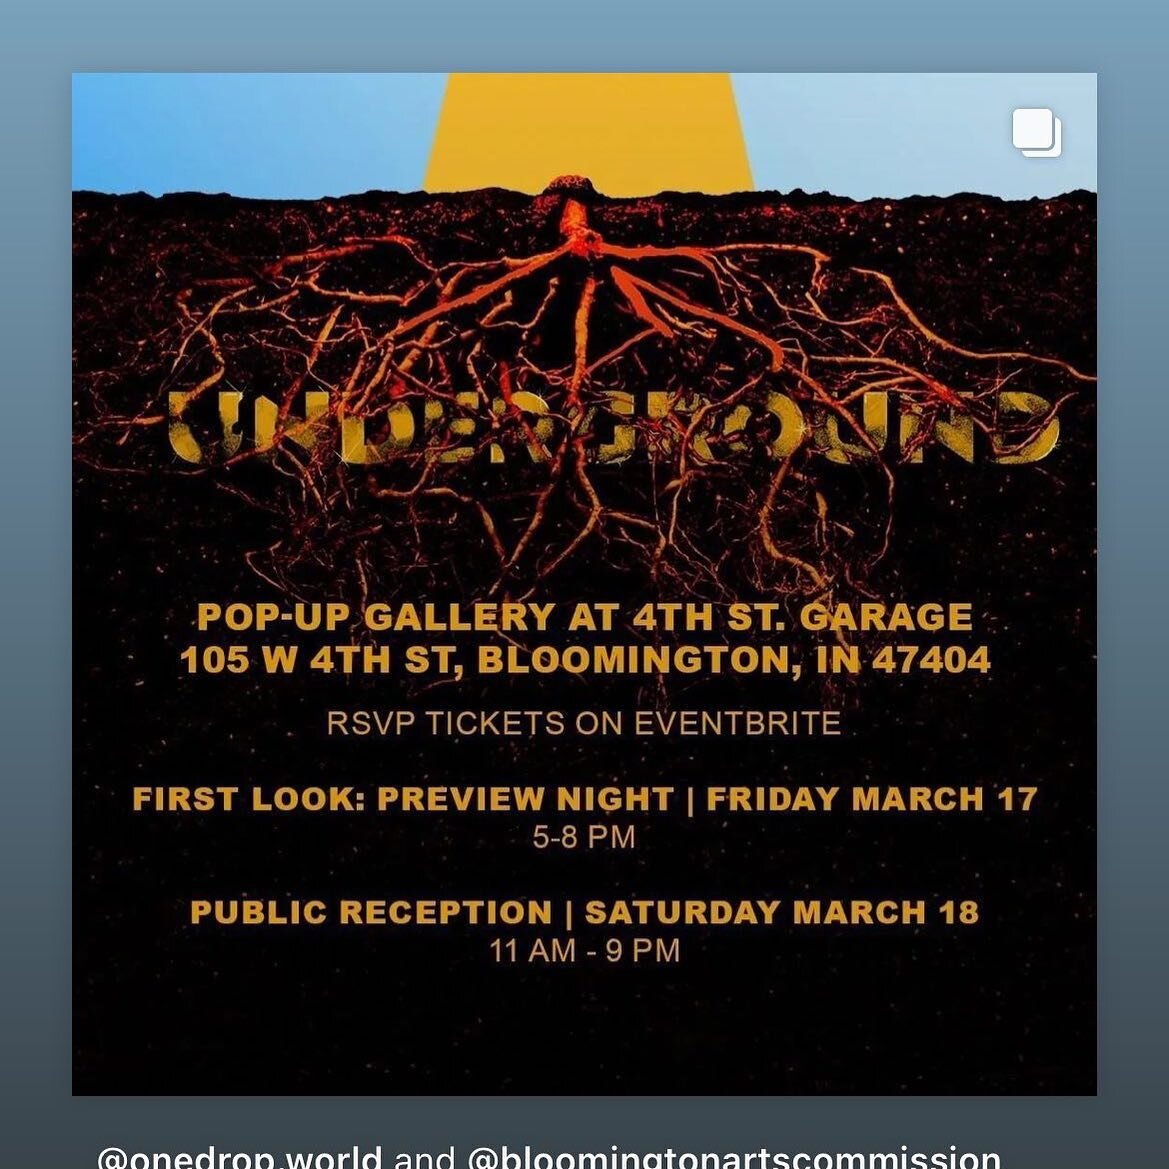 Excited to be part of this exhibit in Bloomington! Thanks to @onedrop.world for the opportunity! Check it out this weekend!

#indyartist #popup #onedropworld #fineartphotography #poetandflower